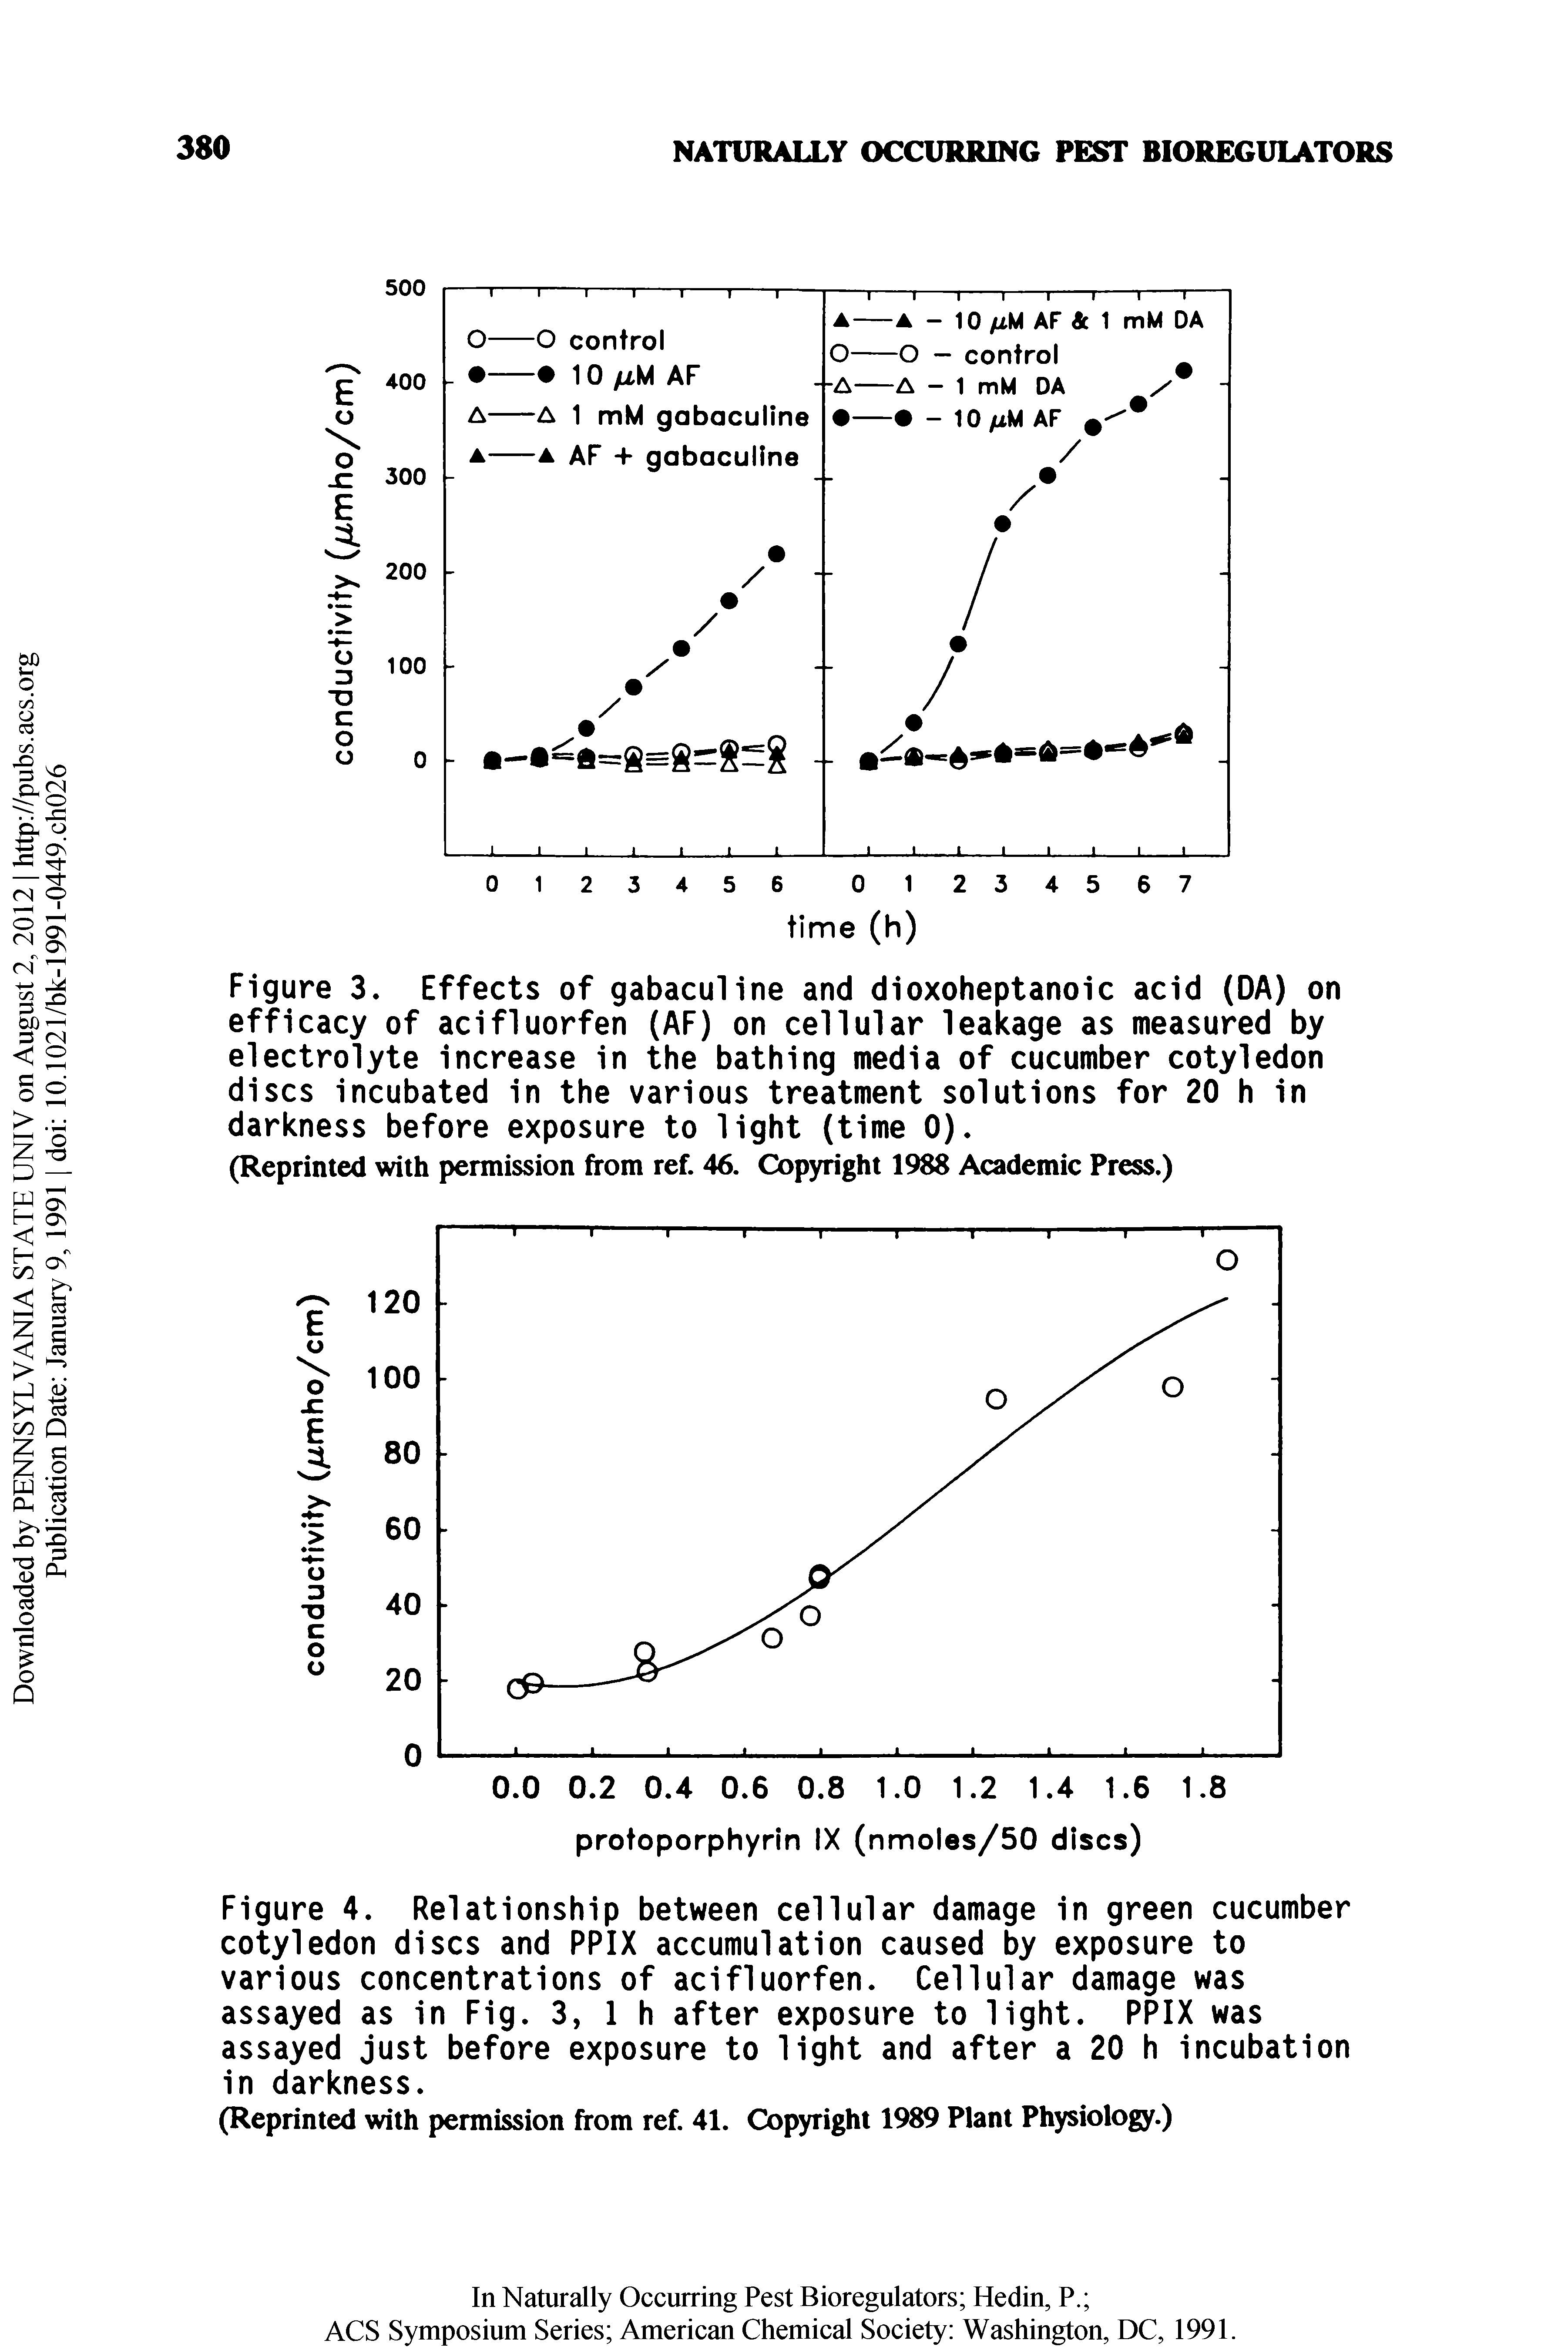 Figure 3. Effects of gabaculine and dioxoheptanoic acid (DA) on efficacy of acifluorfen (AF) on cellular leakage as measured by electrolyte increase in the bathing media of cucumber cotyledon discs incubated in the various treatment solutions for 20 h in darkness before exposure to light (time 0).